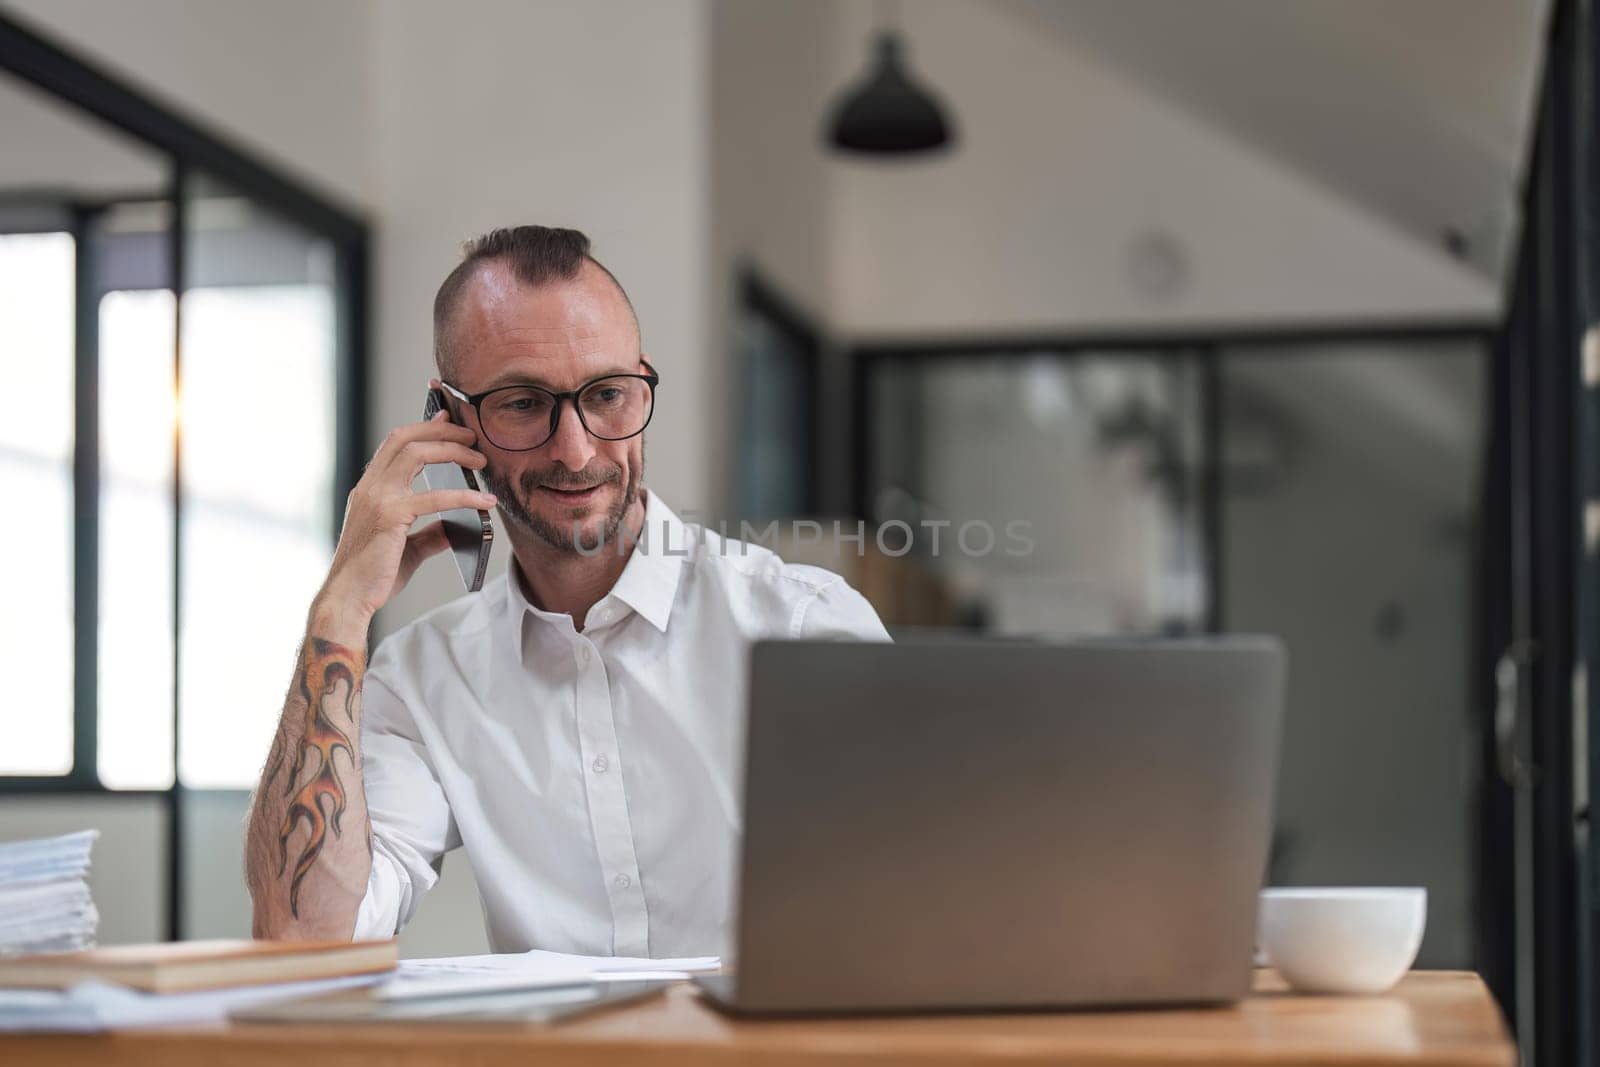 businessman talking on cell phone while working on computer in office.